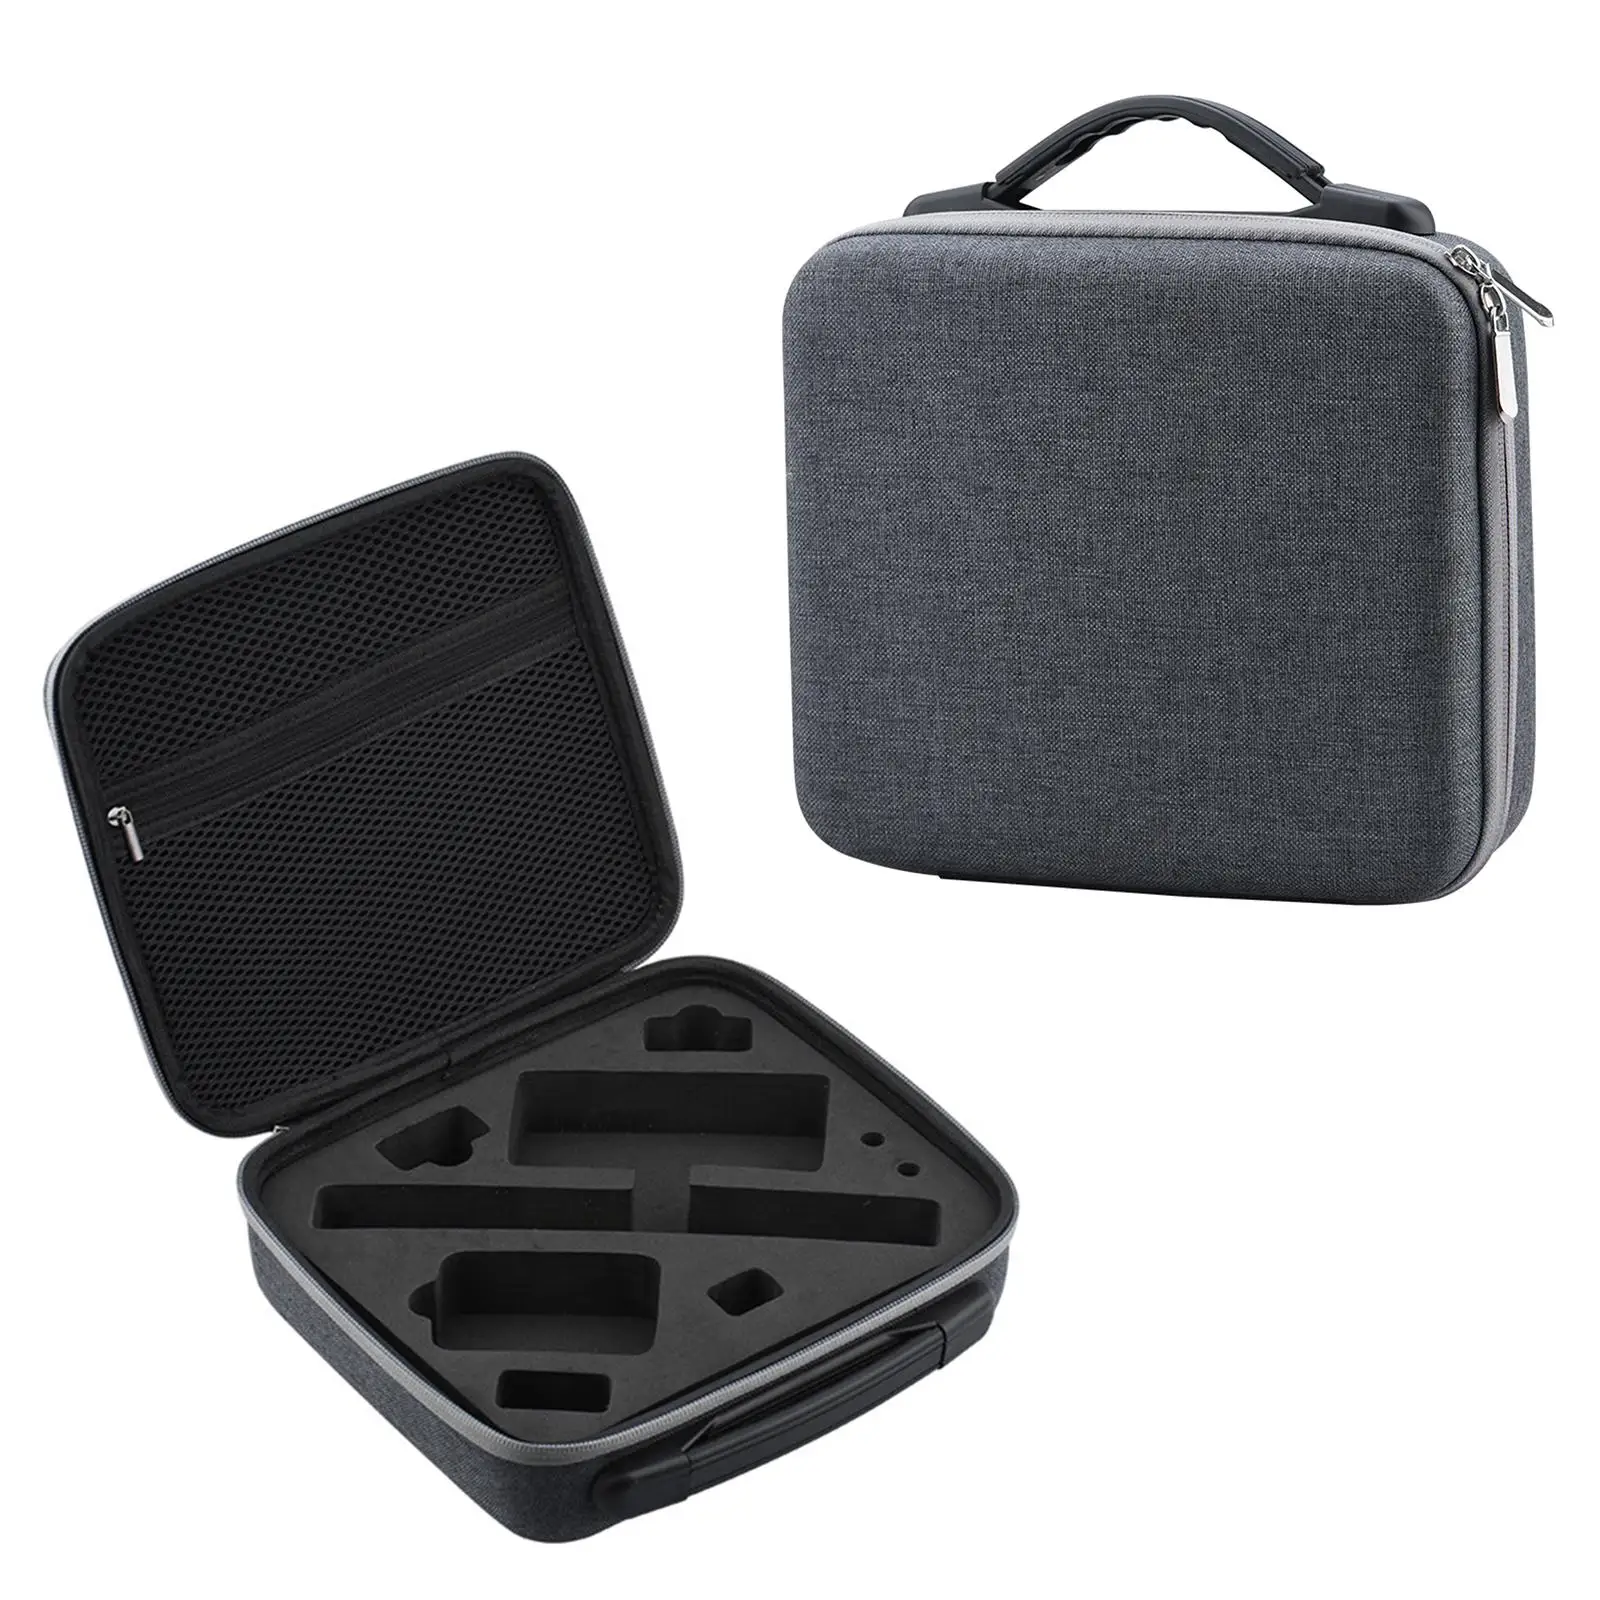 Camera Carrying Case Scratch Resistant Durable Professional Shockproof Storage Bag